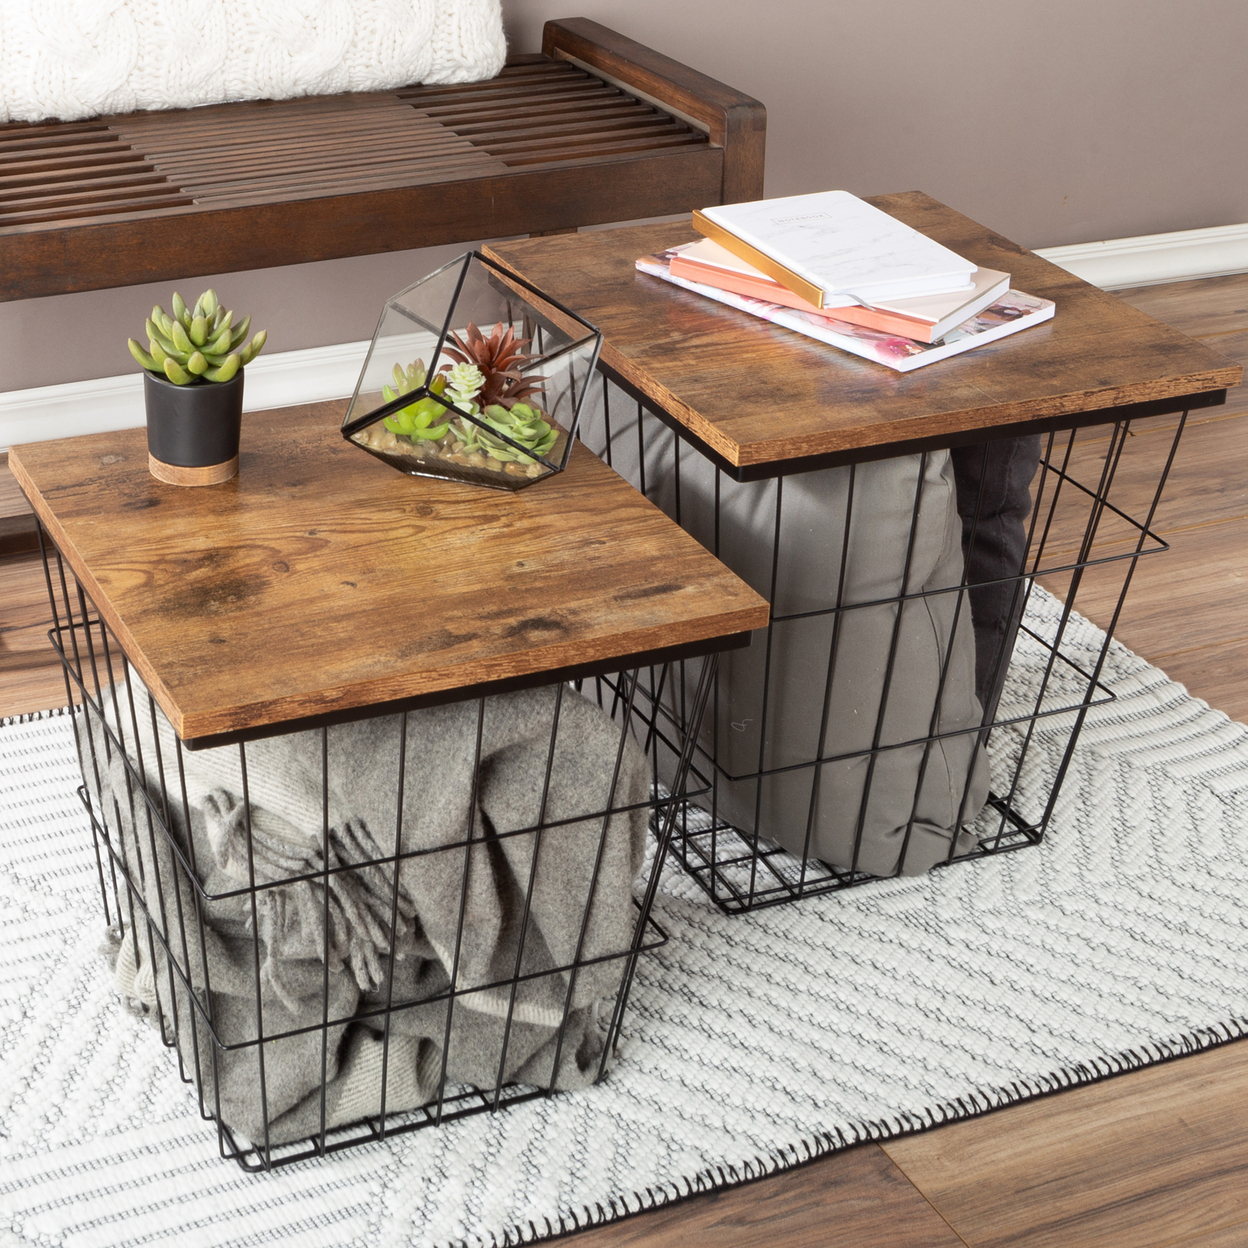 End Table With Storage 2 Nesting Tables Square Wire Basket Base And Wood Tops